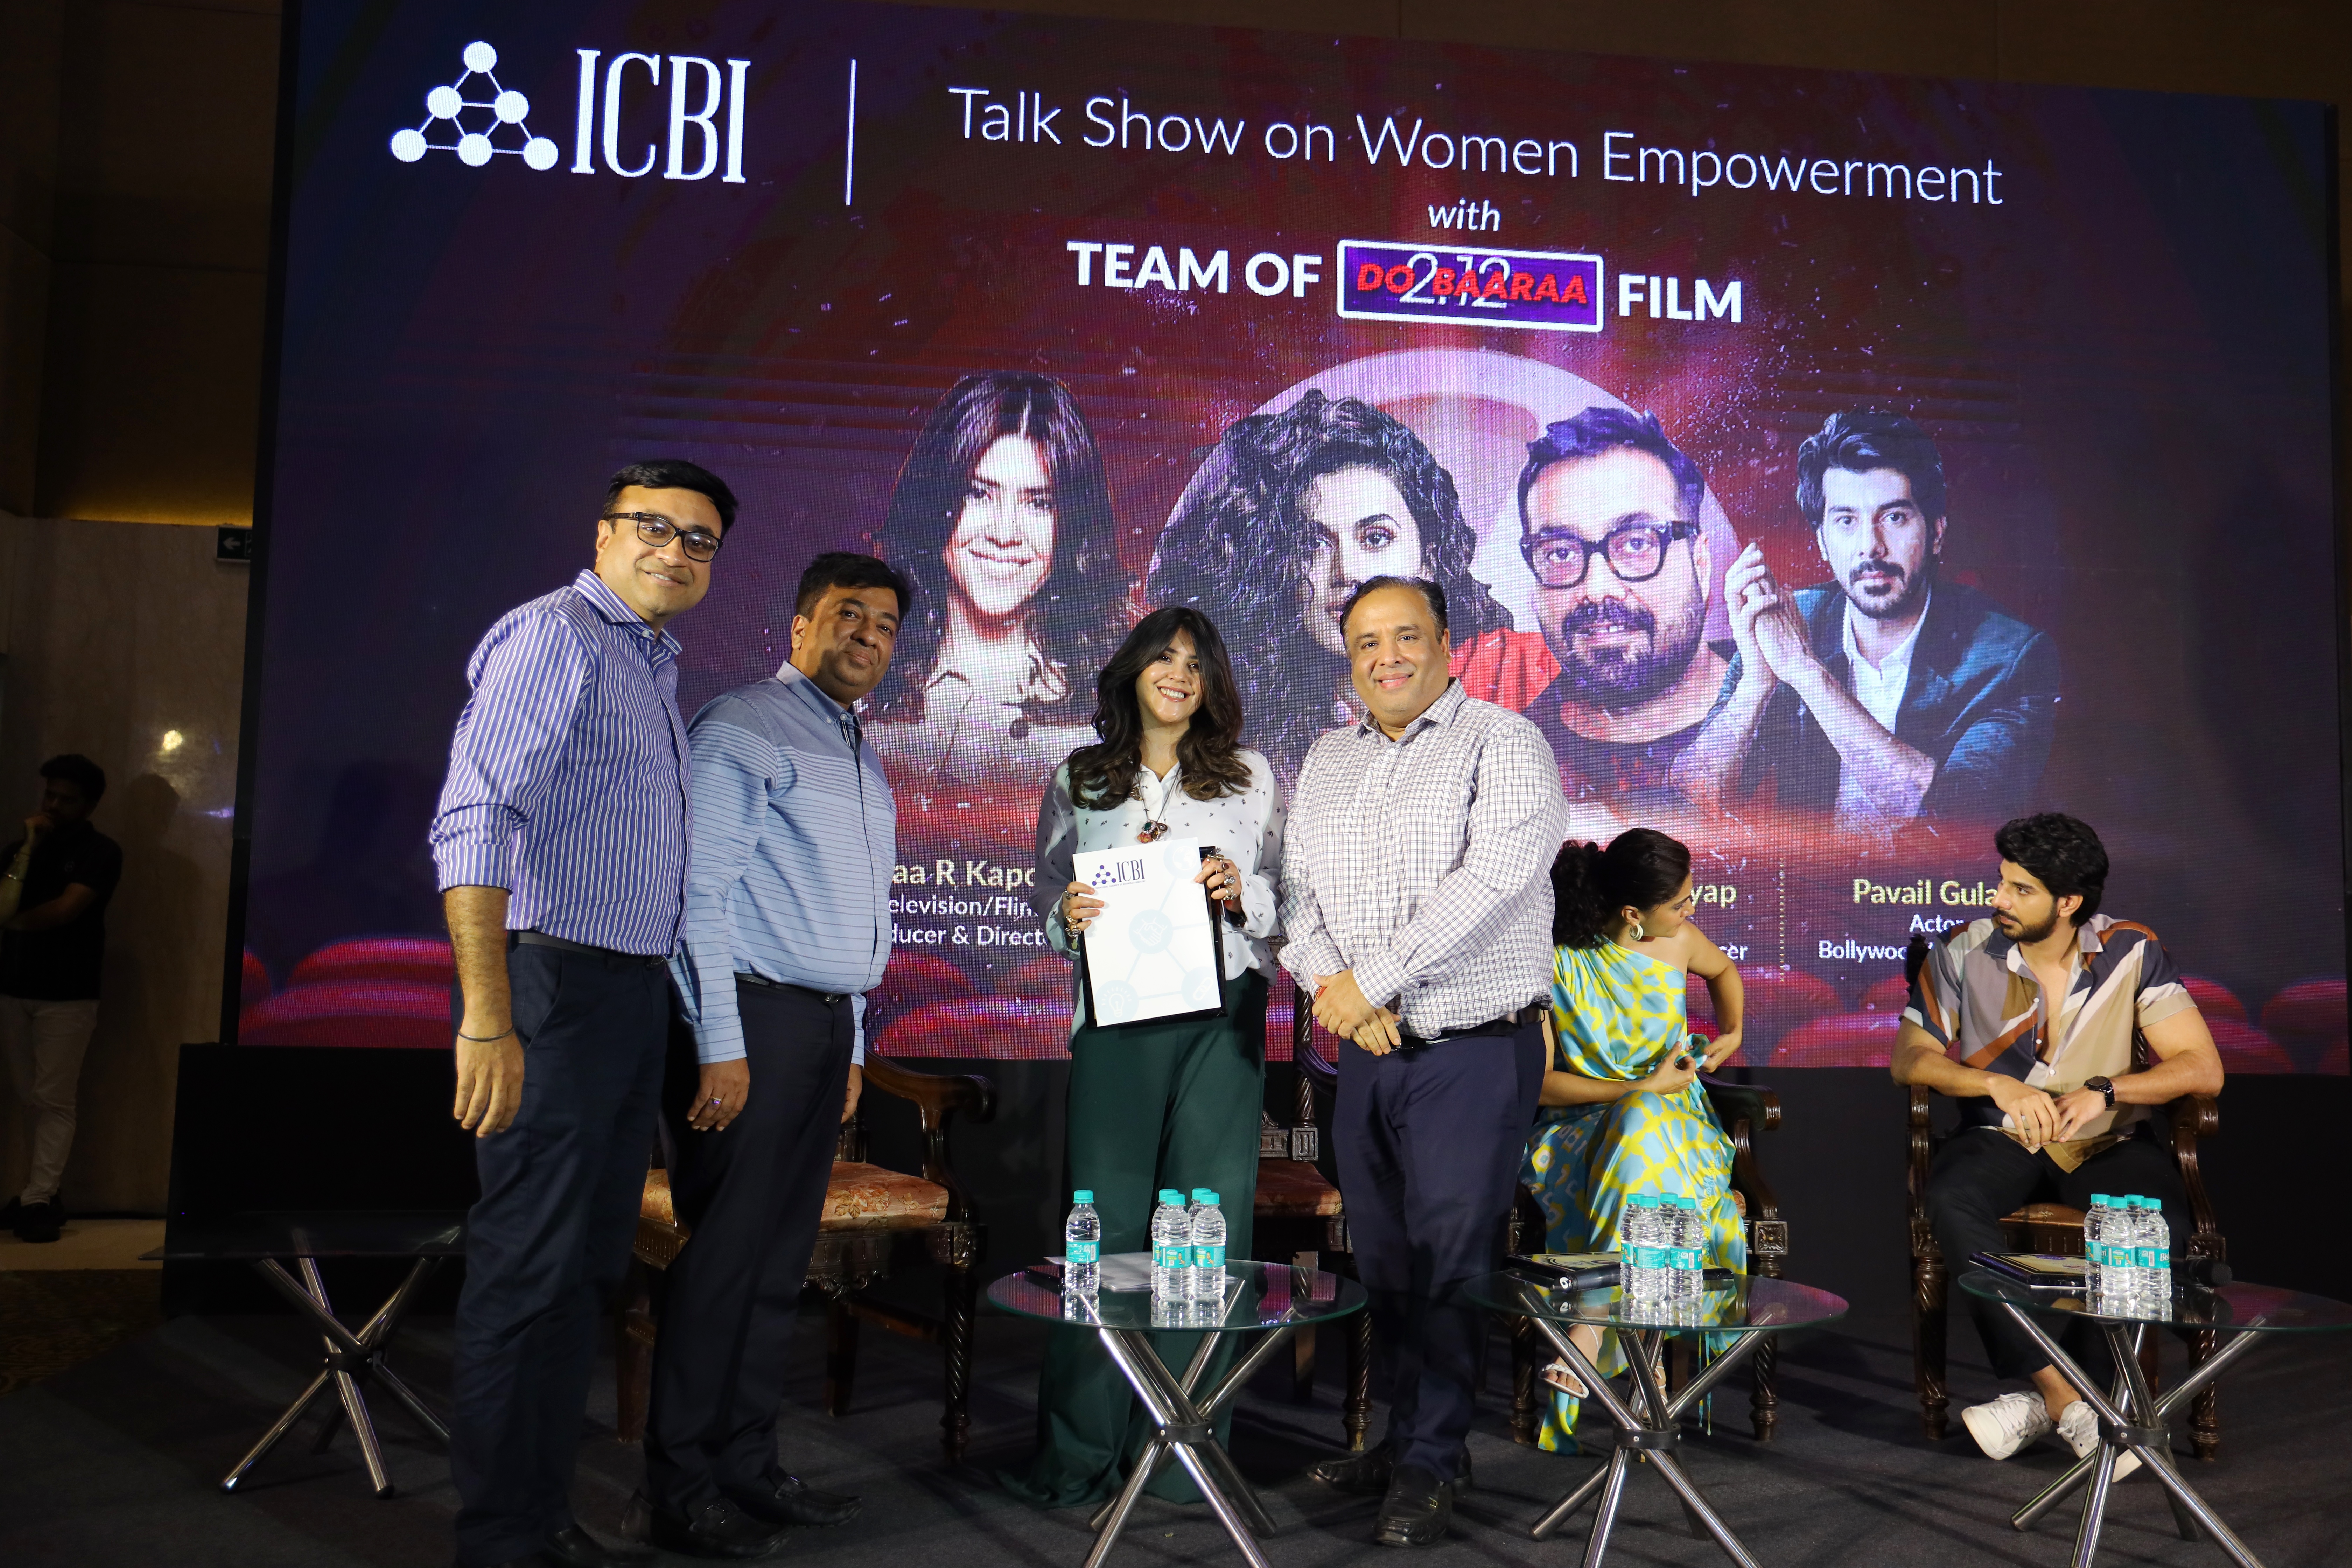 Team Do-Baara Pioneers Women Empowerment at A Talk Show Hosted By International Chamber of Business and Industry